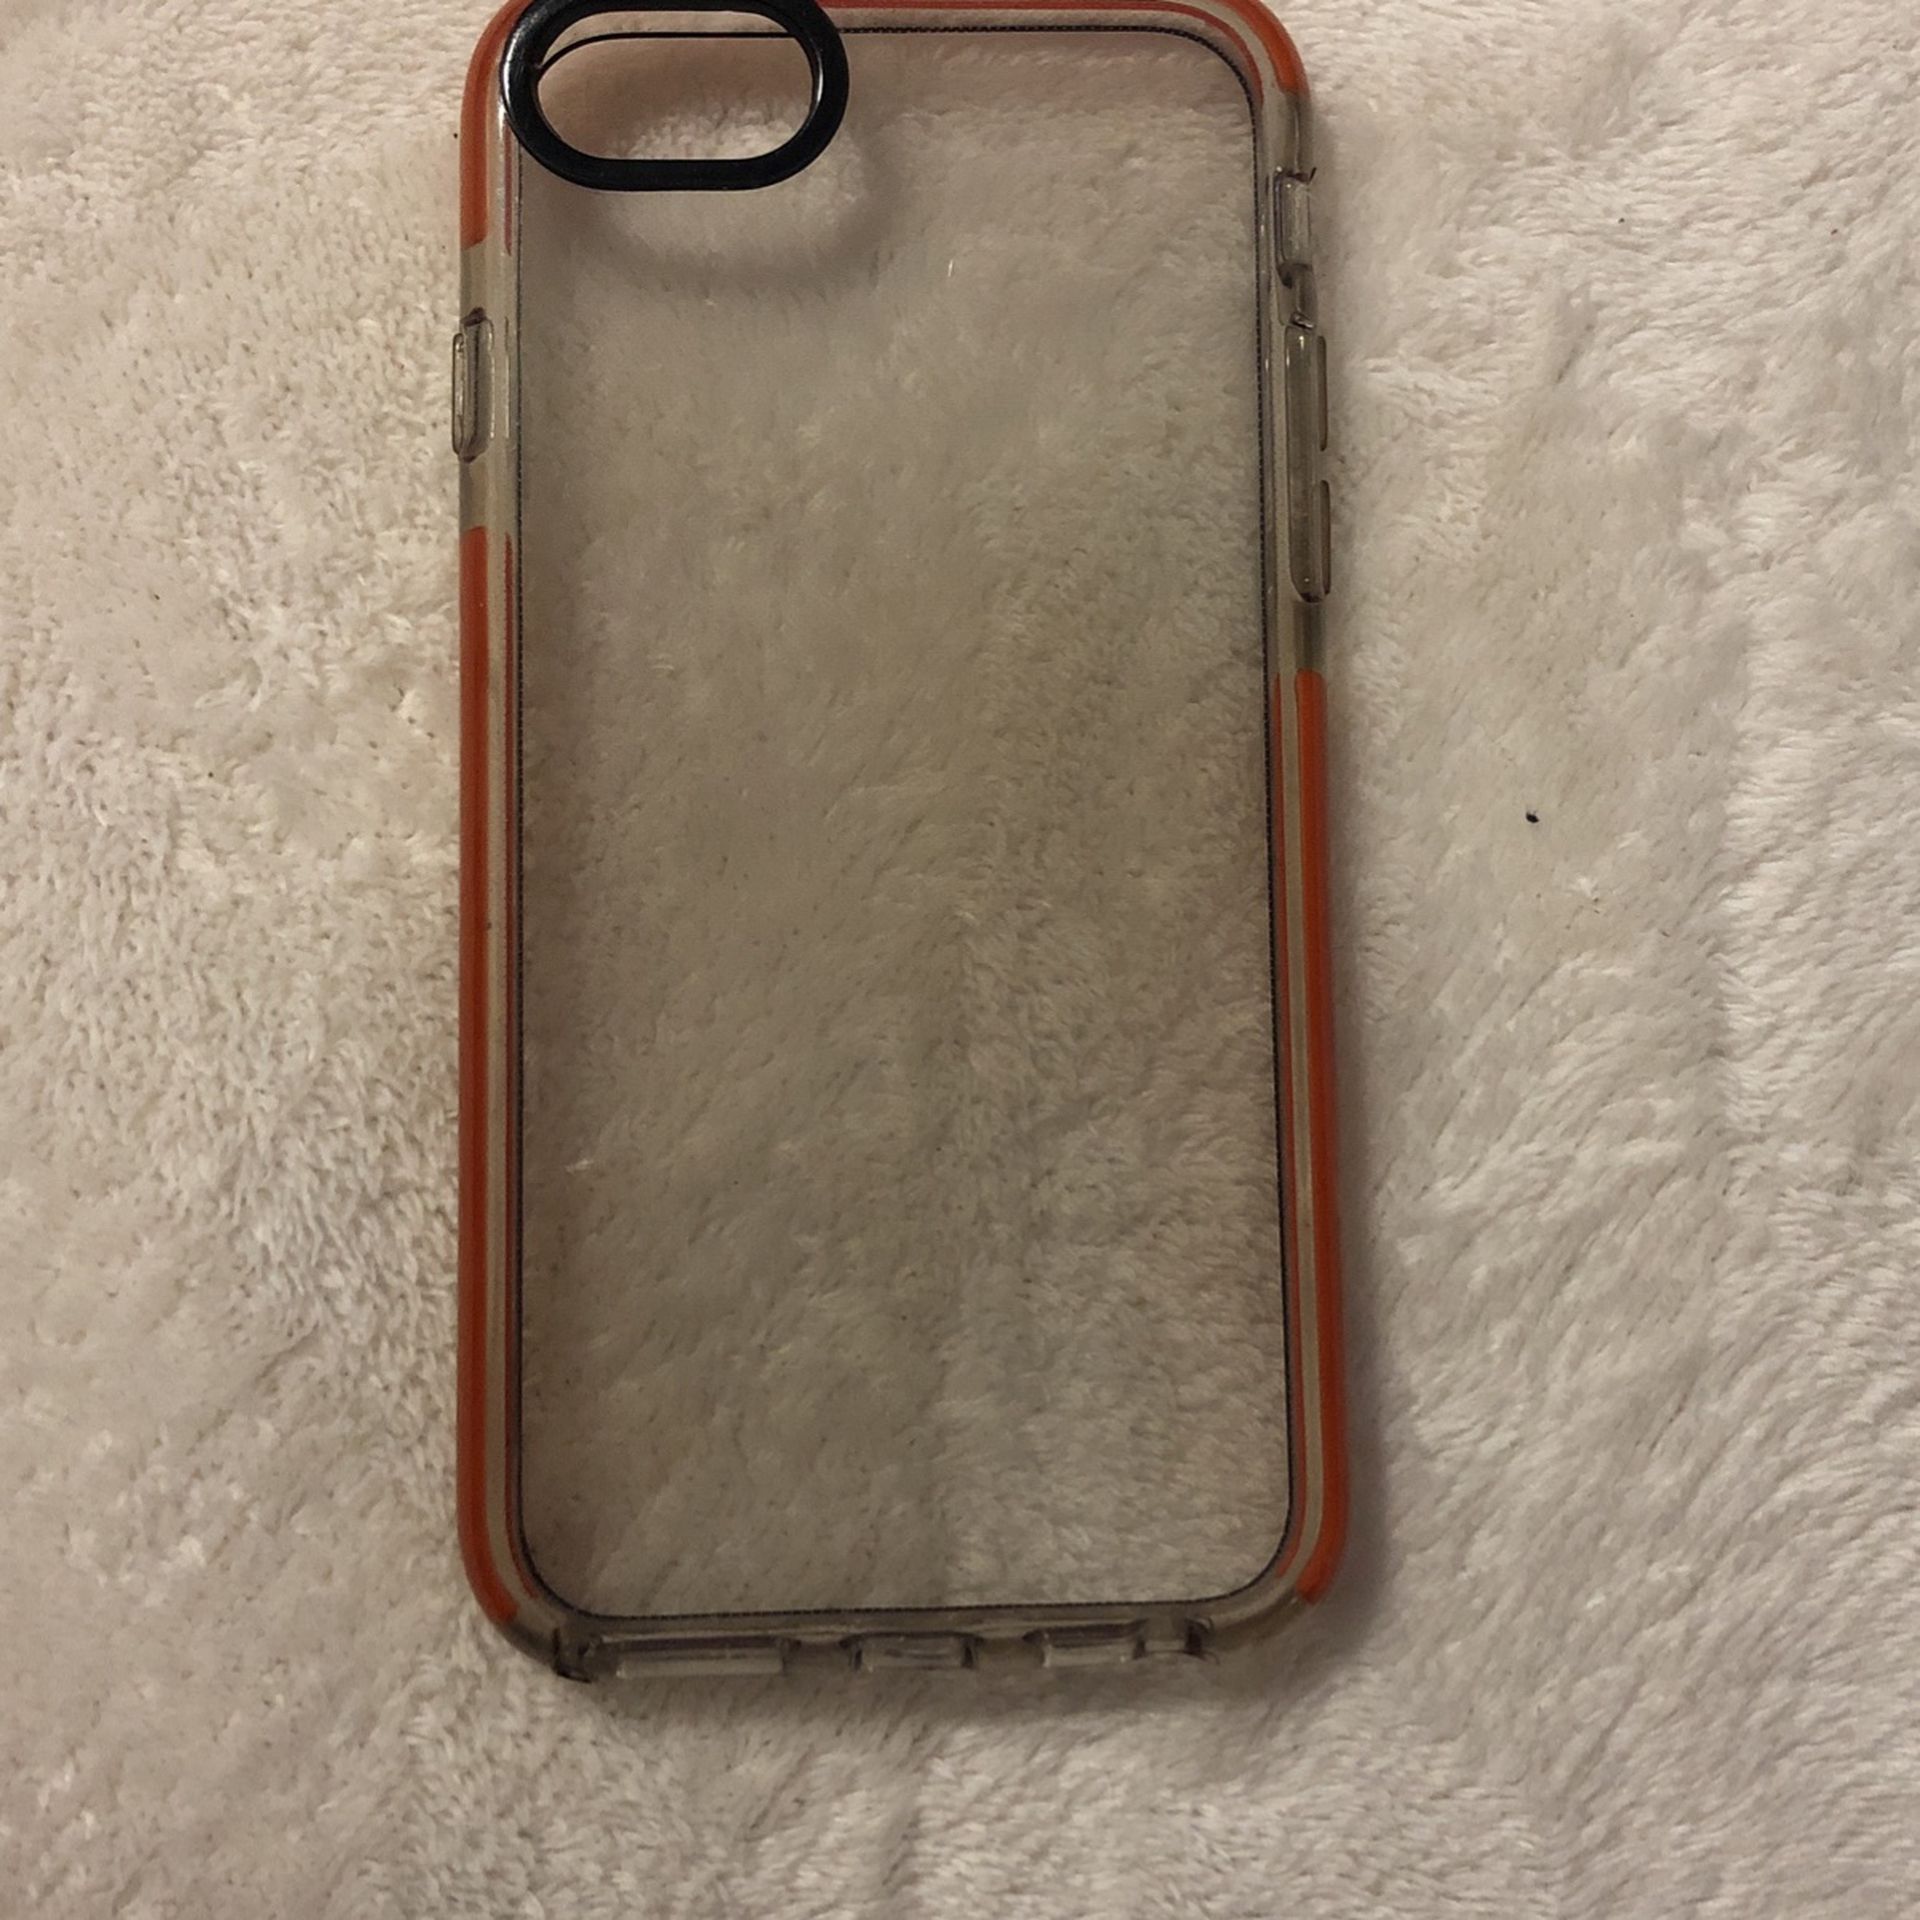 Clear Protective Case For iPhone 7 (orange)